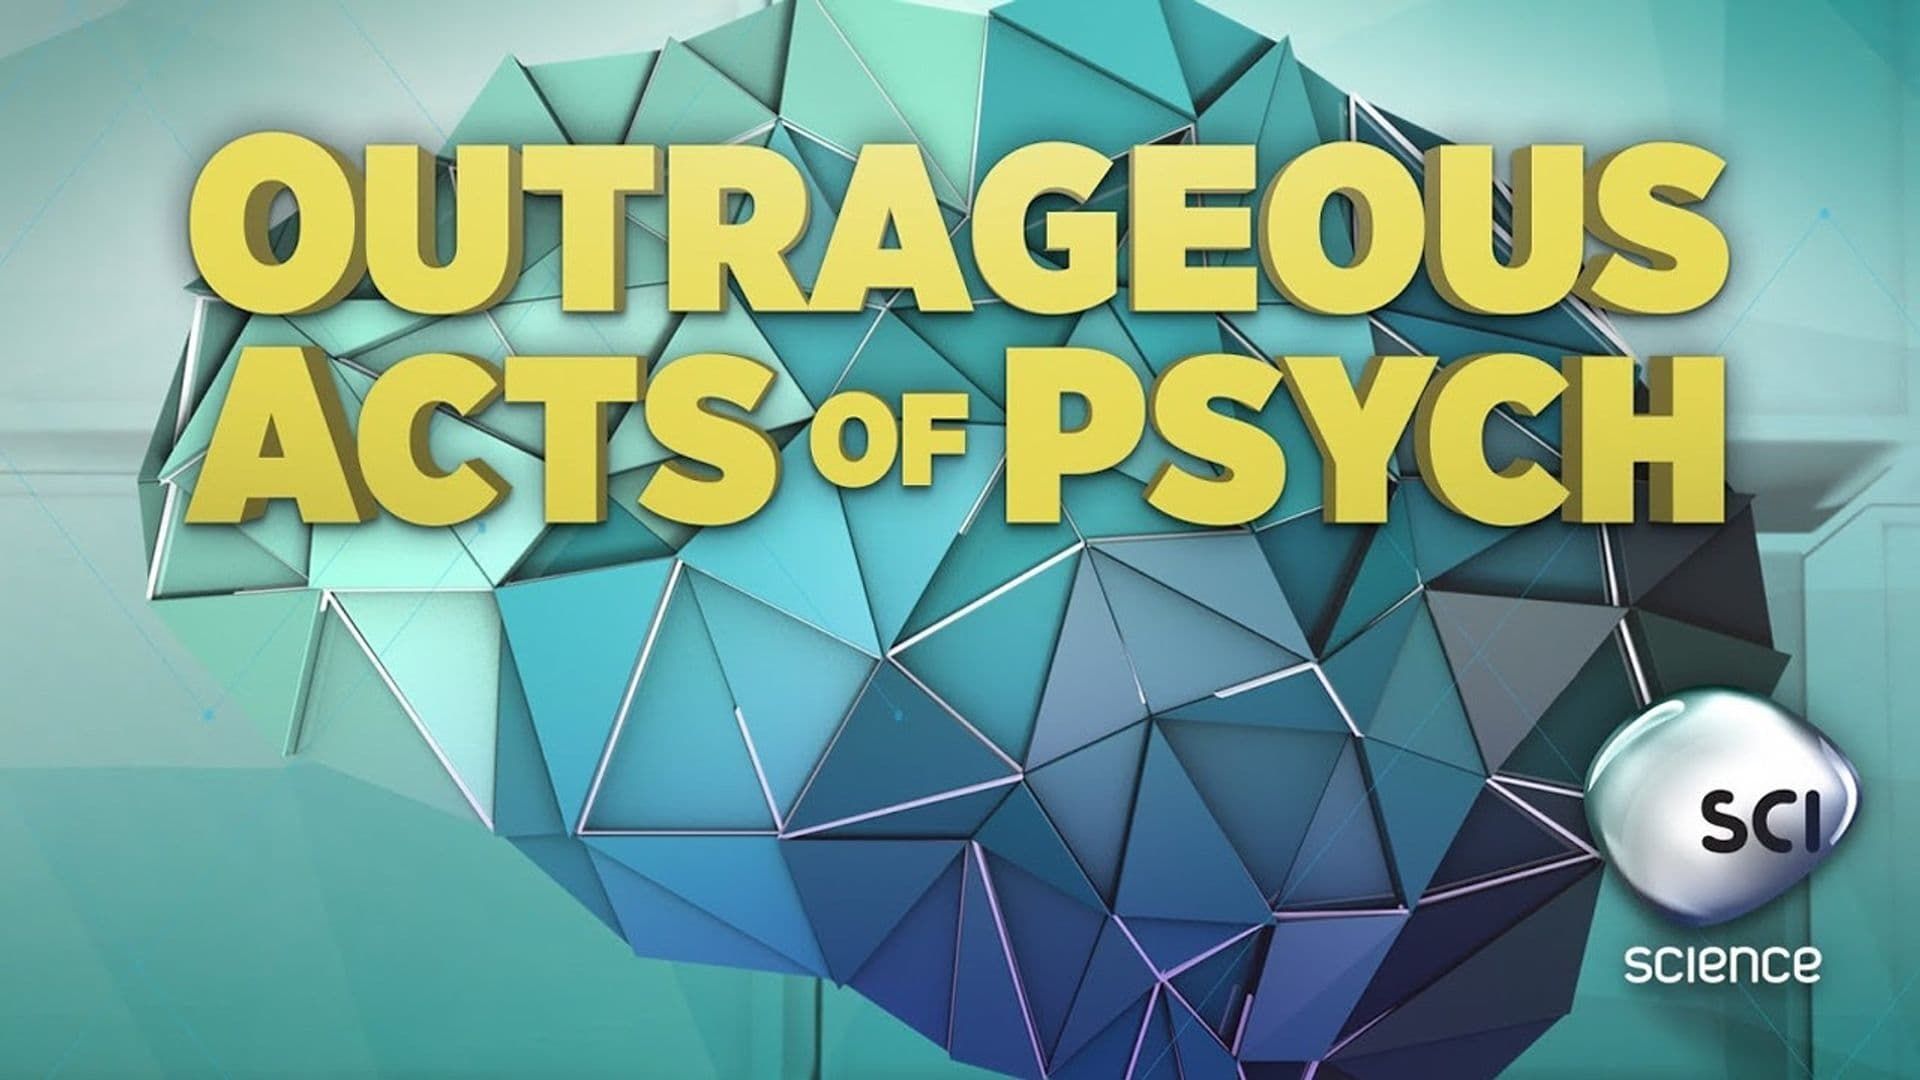 Outrageous Acts of Psych background